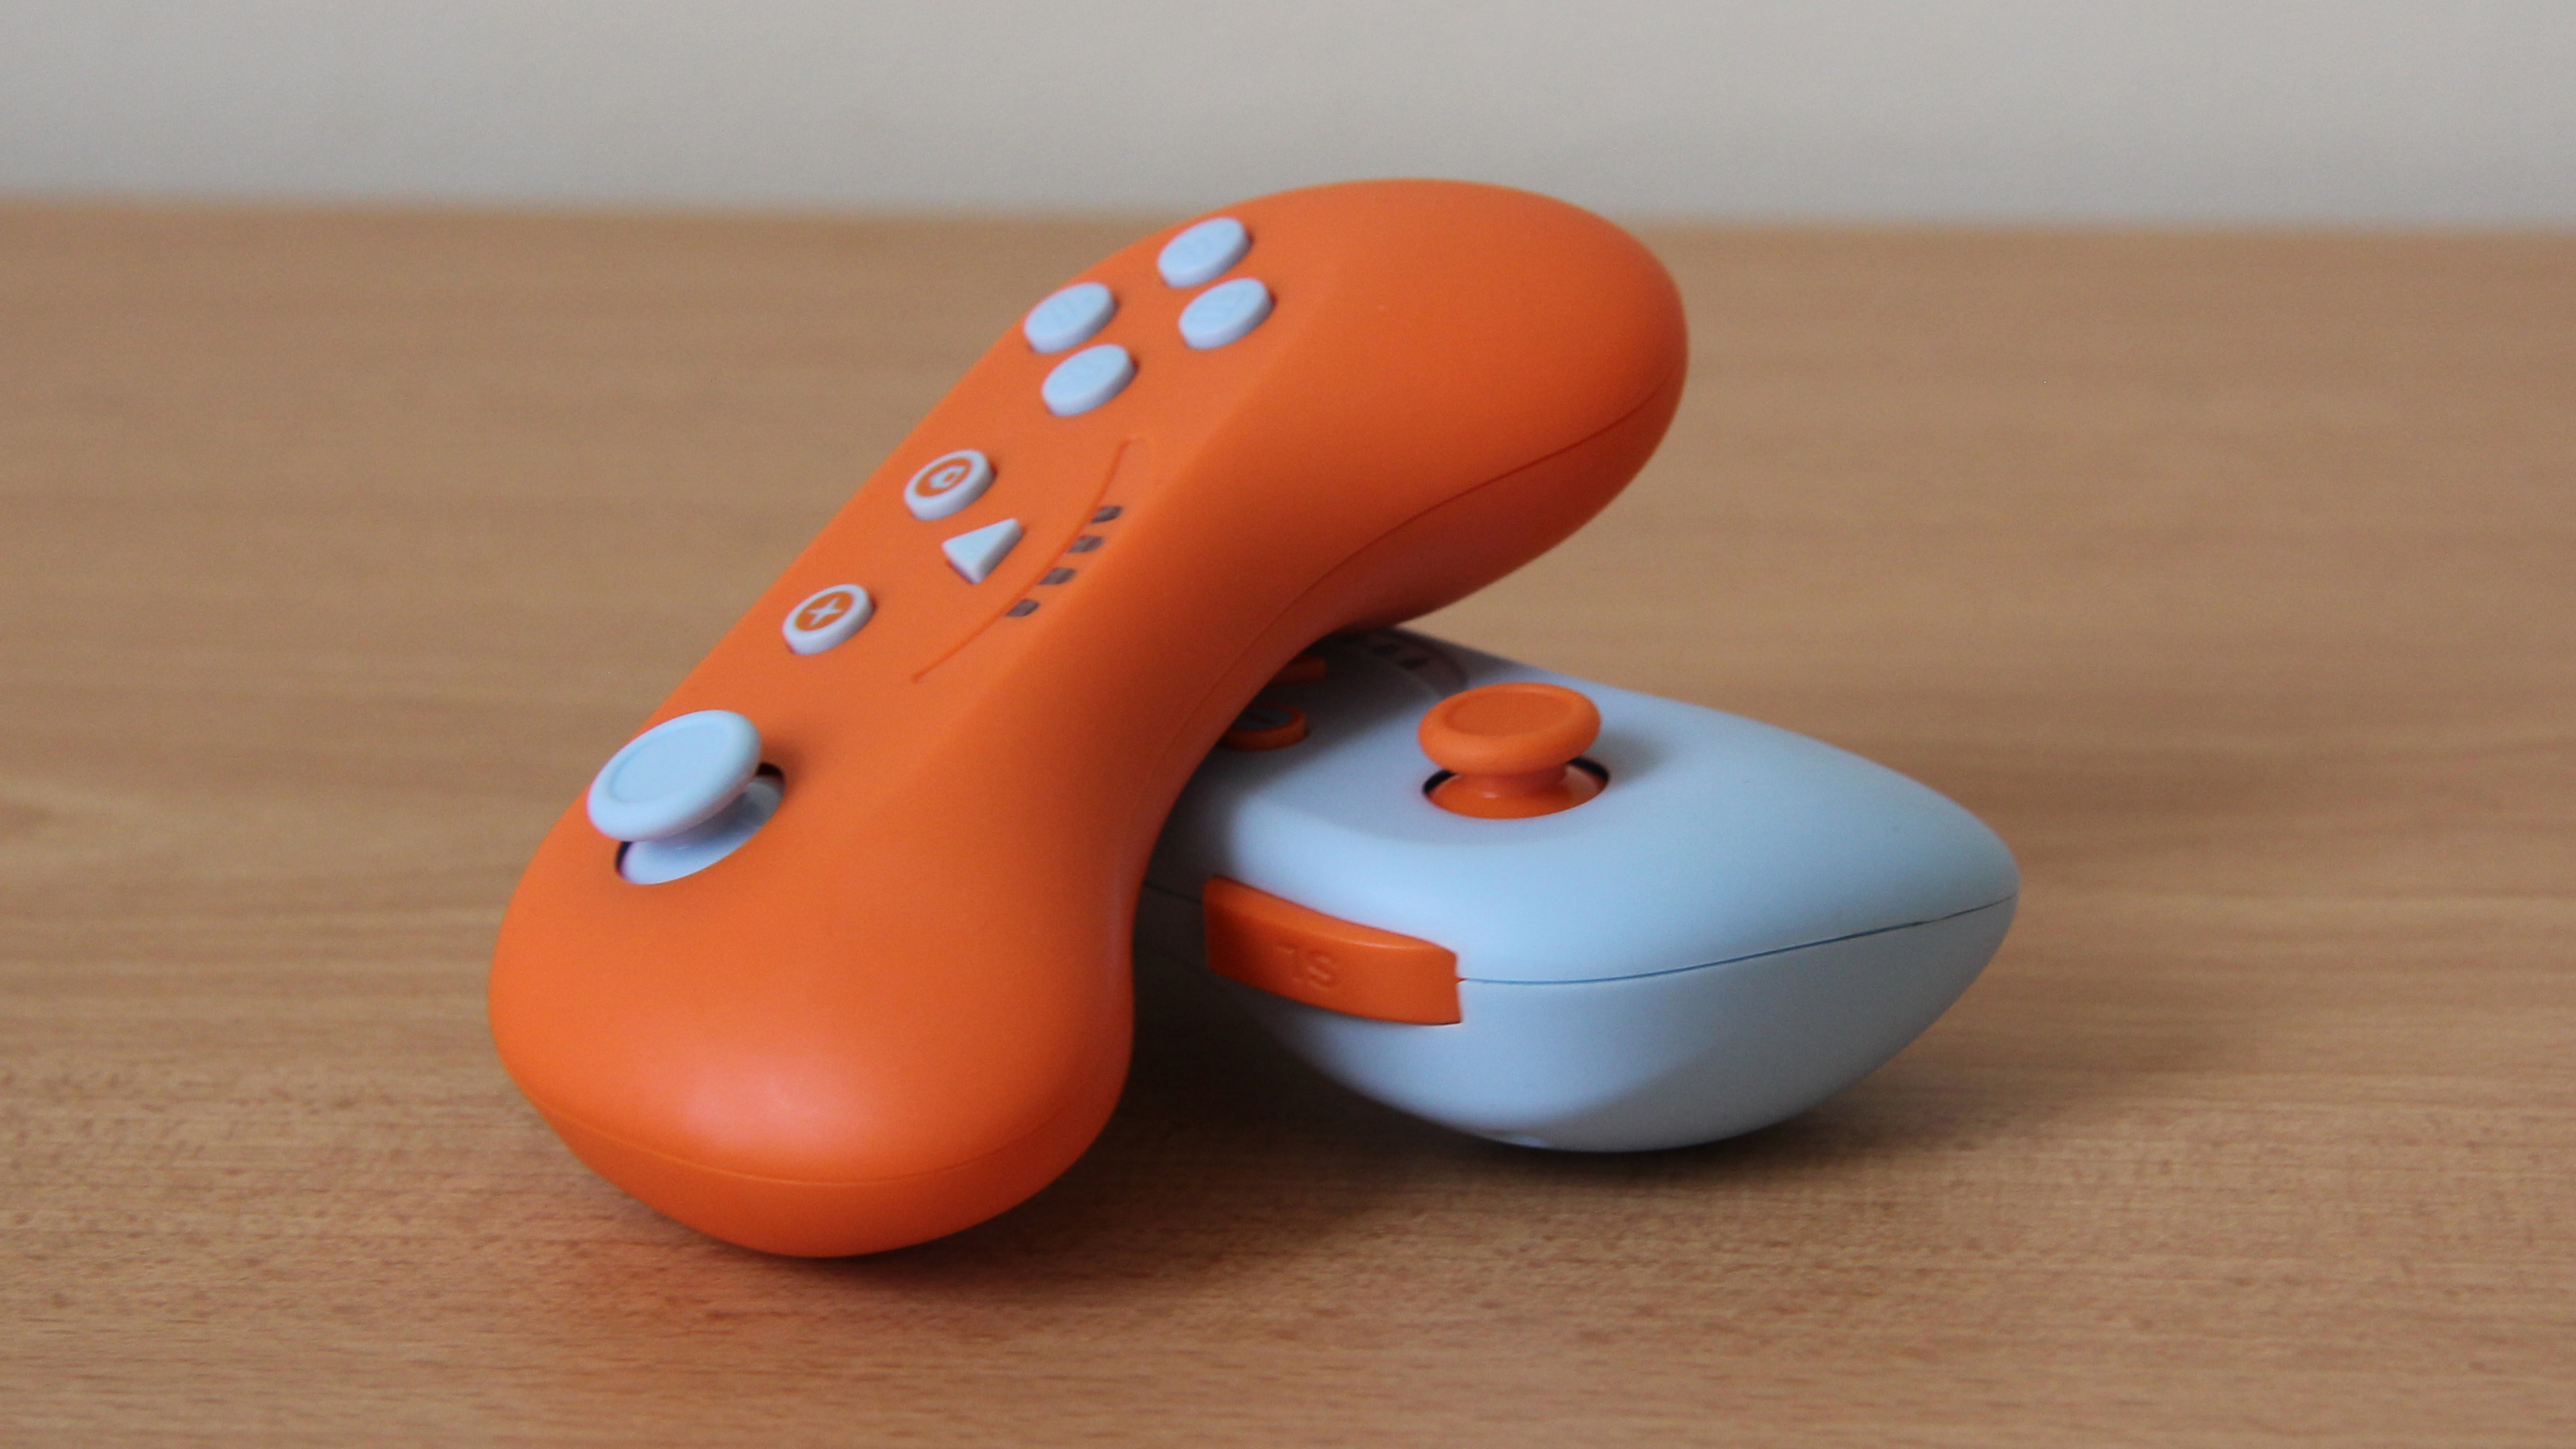 snakebyte switch controller